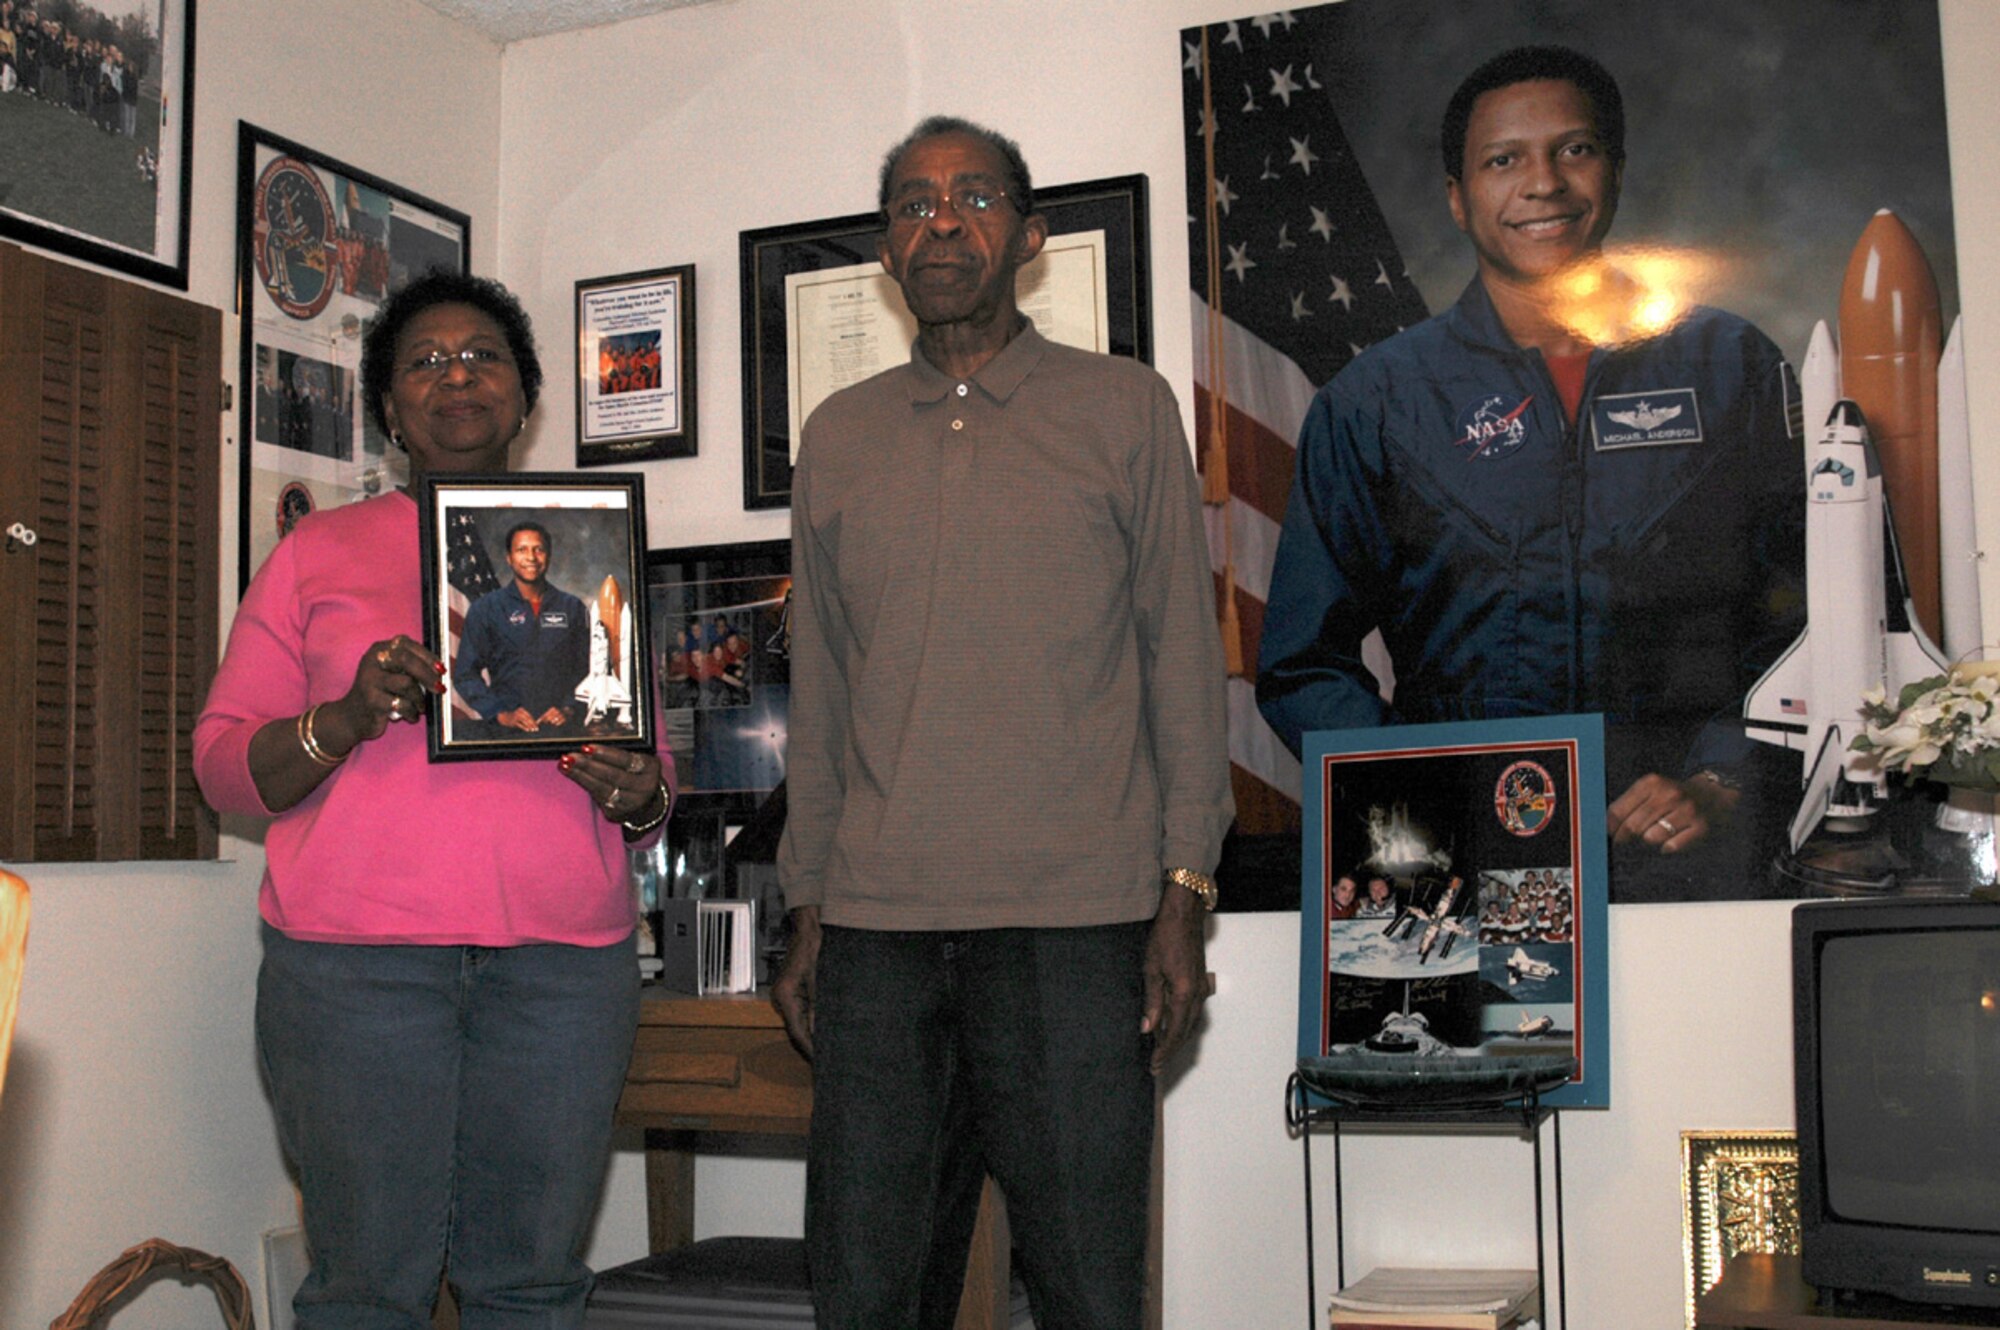 FAIRCHILD AIR FORCE BASE, Wash. (AFPN) -- Barbara and Bobby Anderson, parents of astronaut Lt. Col. Michael Anderson, hold up a picture of their son in the basement of their Spokane, Wash., home. Colonel Anderson was one of only a handful of African-American astronauts and one of seven crewmembers aboard the Space Shuttle Columbia when it exploded on re-entry just minutes before its scheduled touchdown Feb. 1, 2003. (U.S. Air Force photo by Senior Airman Christie Putz)